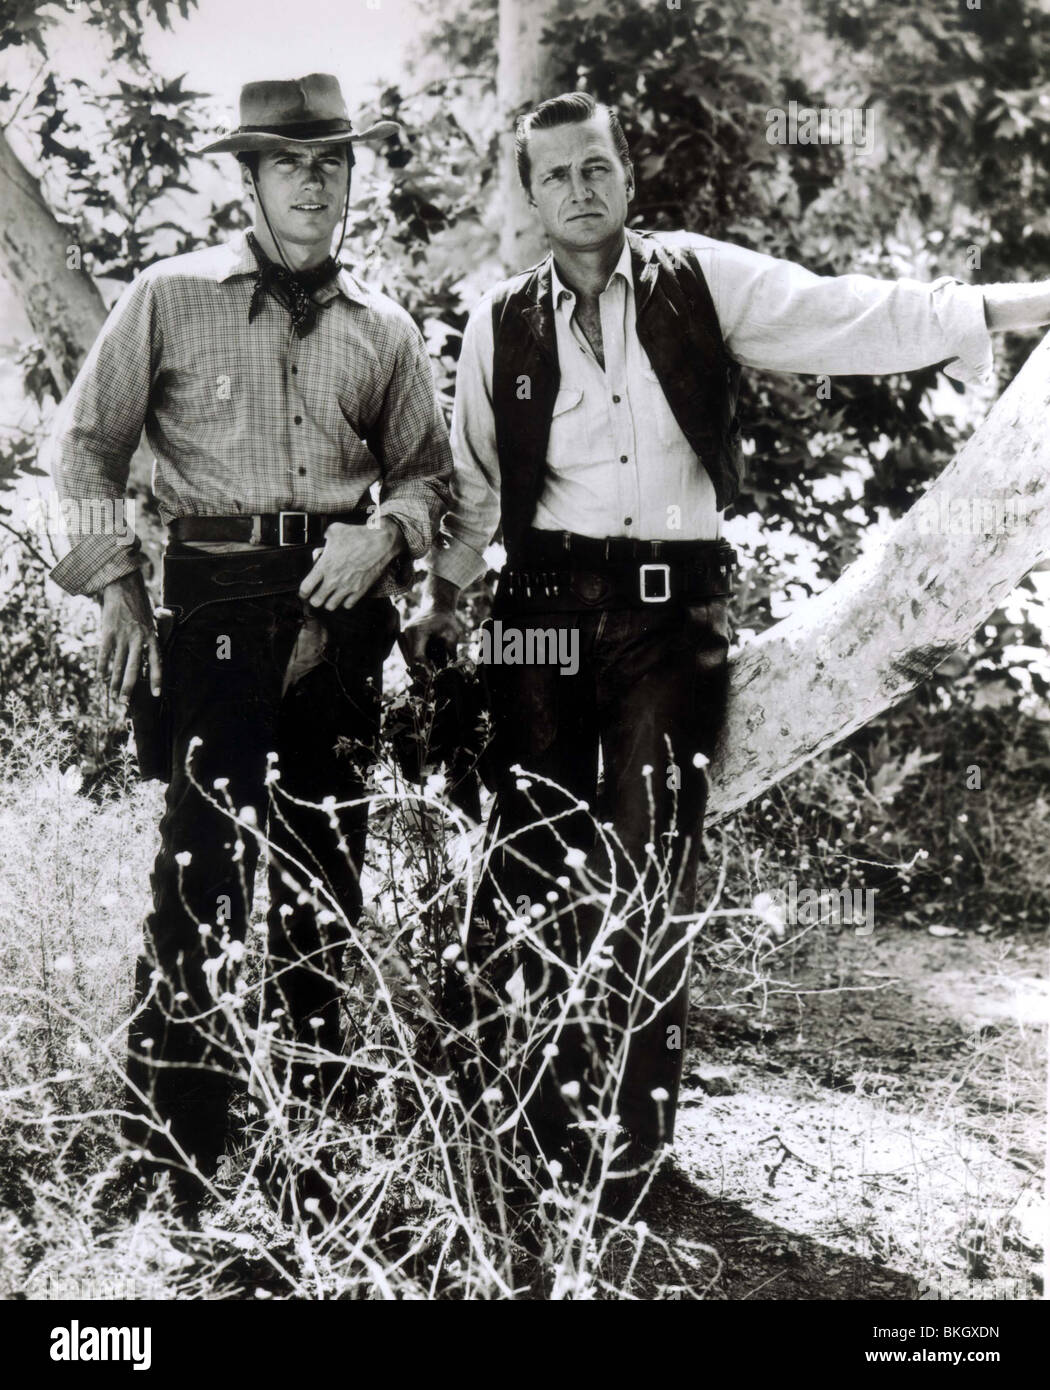 ROHLEDER (TV) CLINT EASTWOOD, ERIC FLEMING RWH 020P Stockfoto